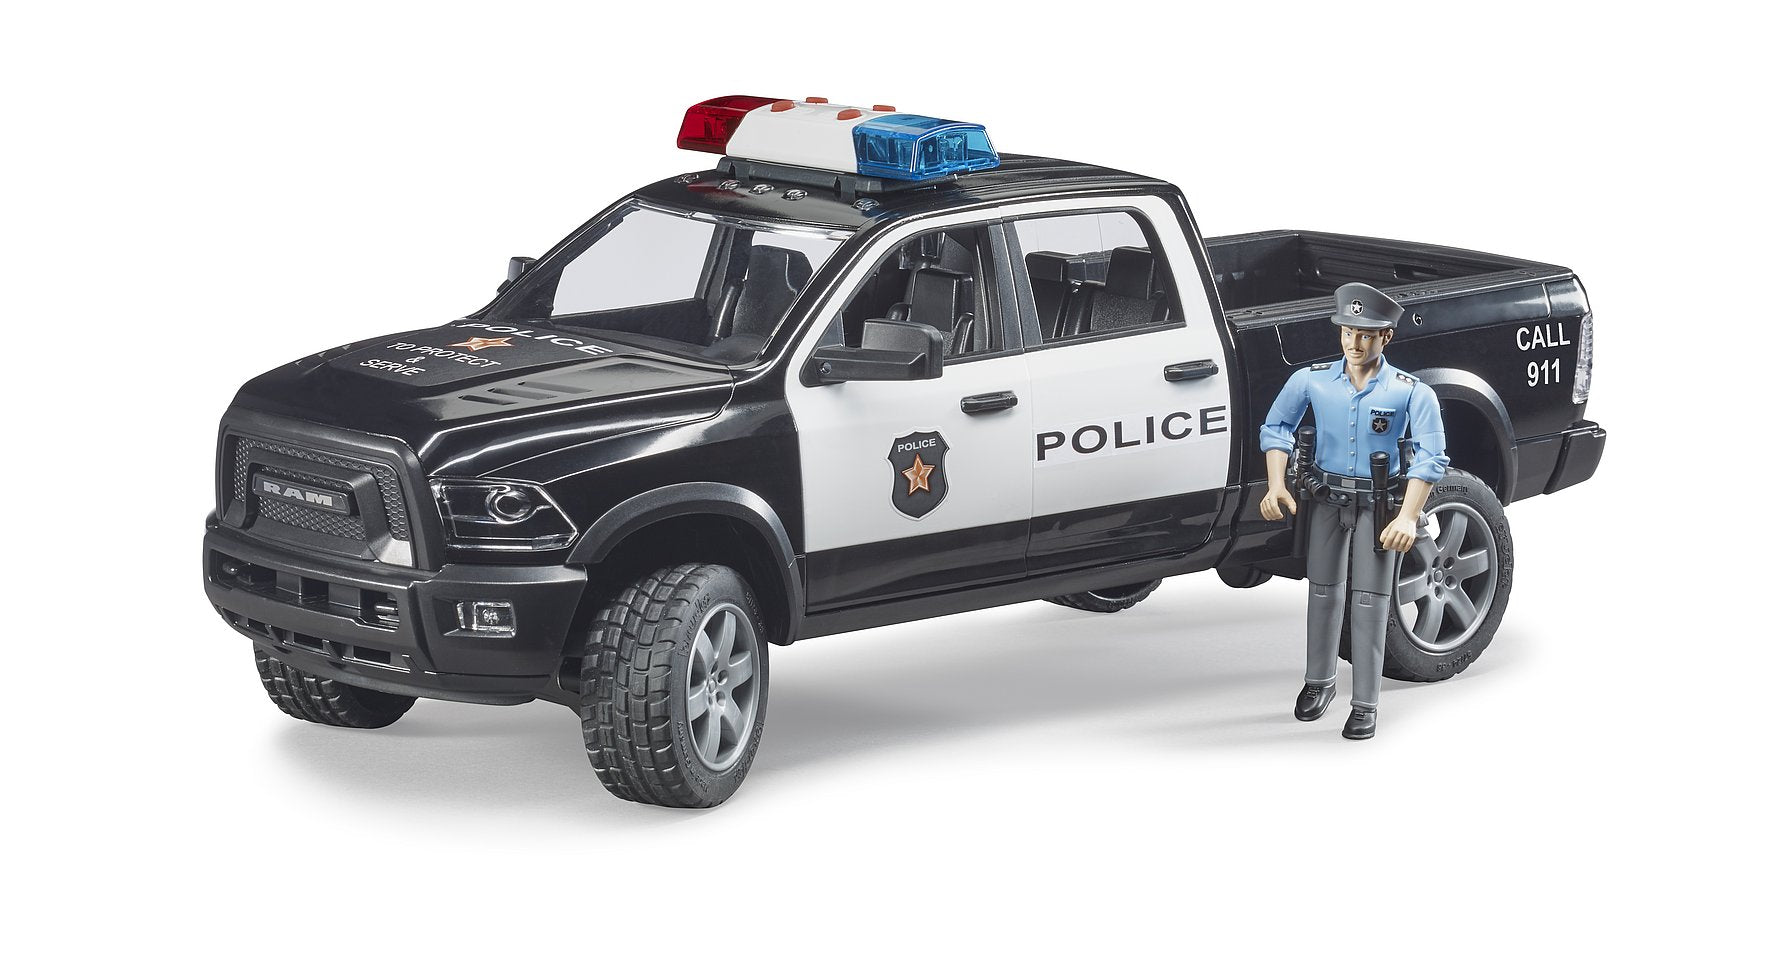 Police RAM 2500 Truck with Policeman